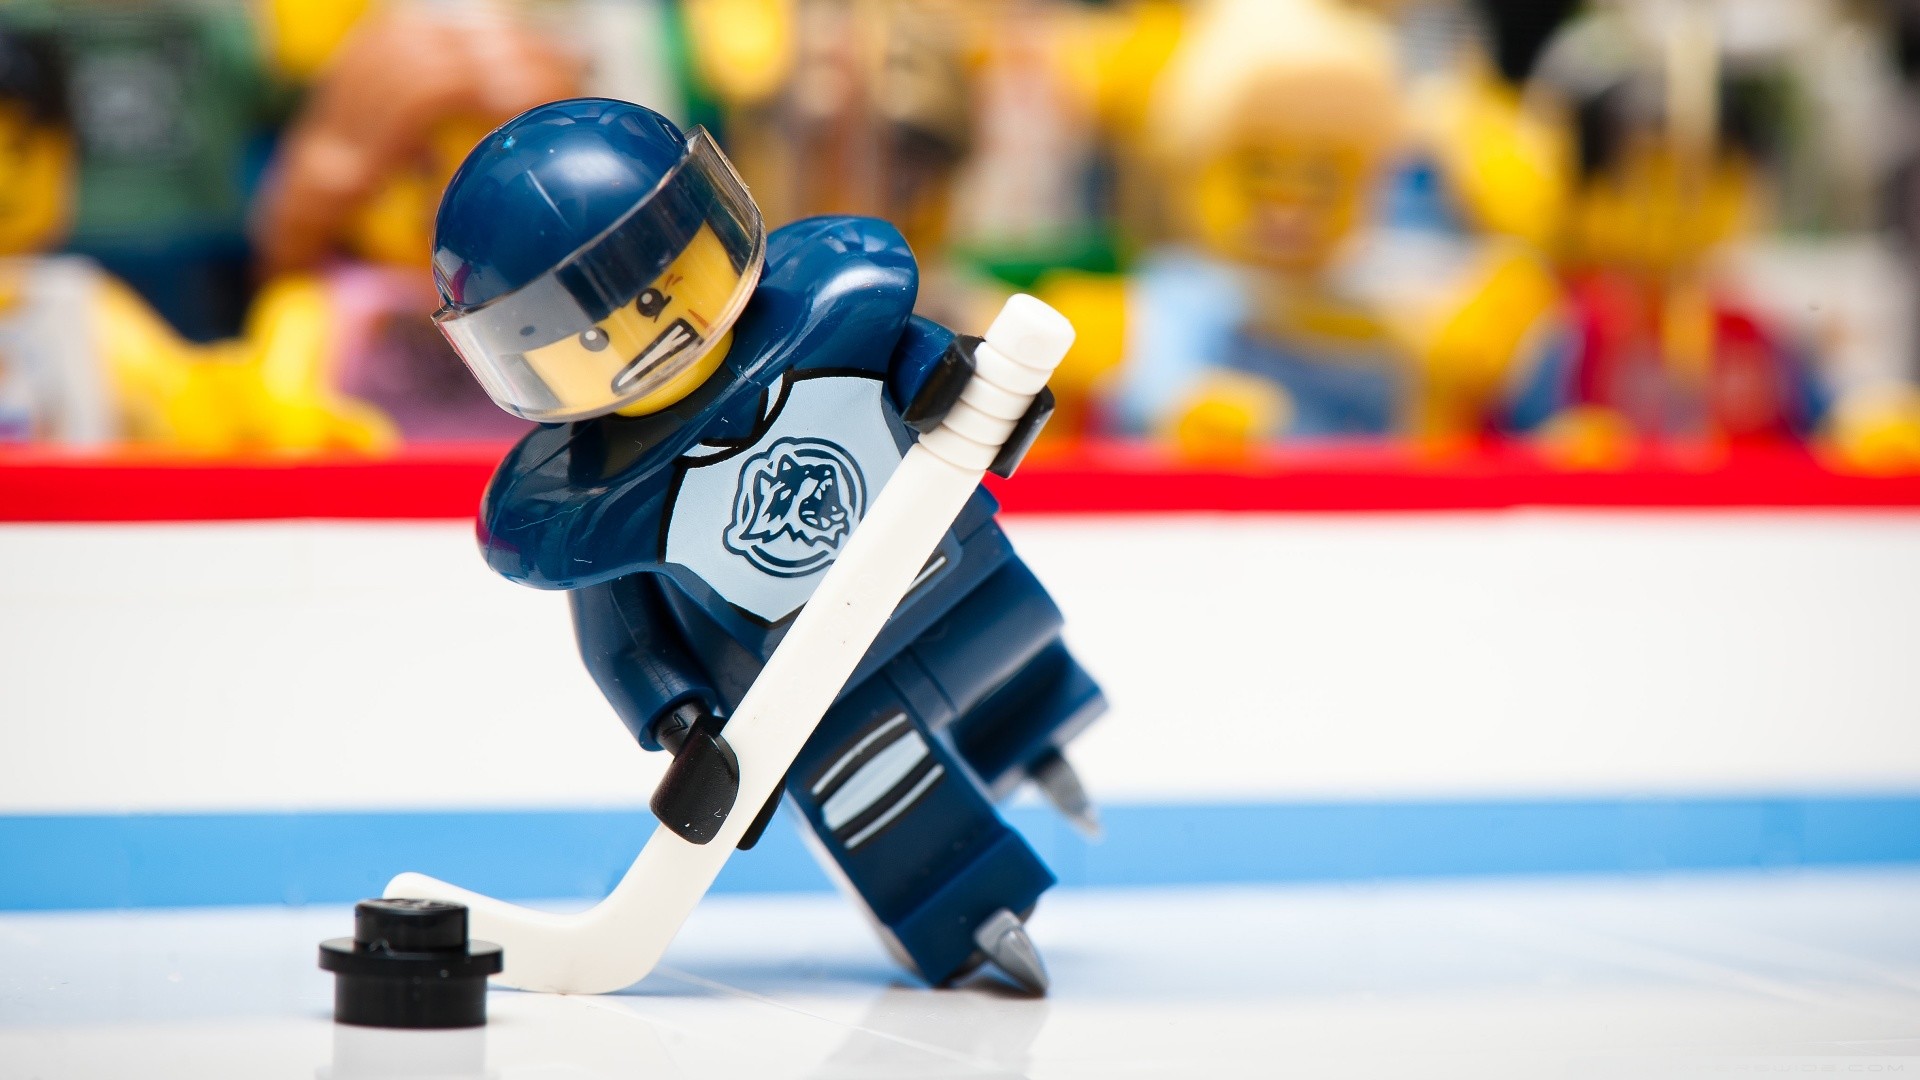 hockey wallpaper,competition event,tournament,player,sports gear,toy